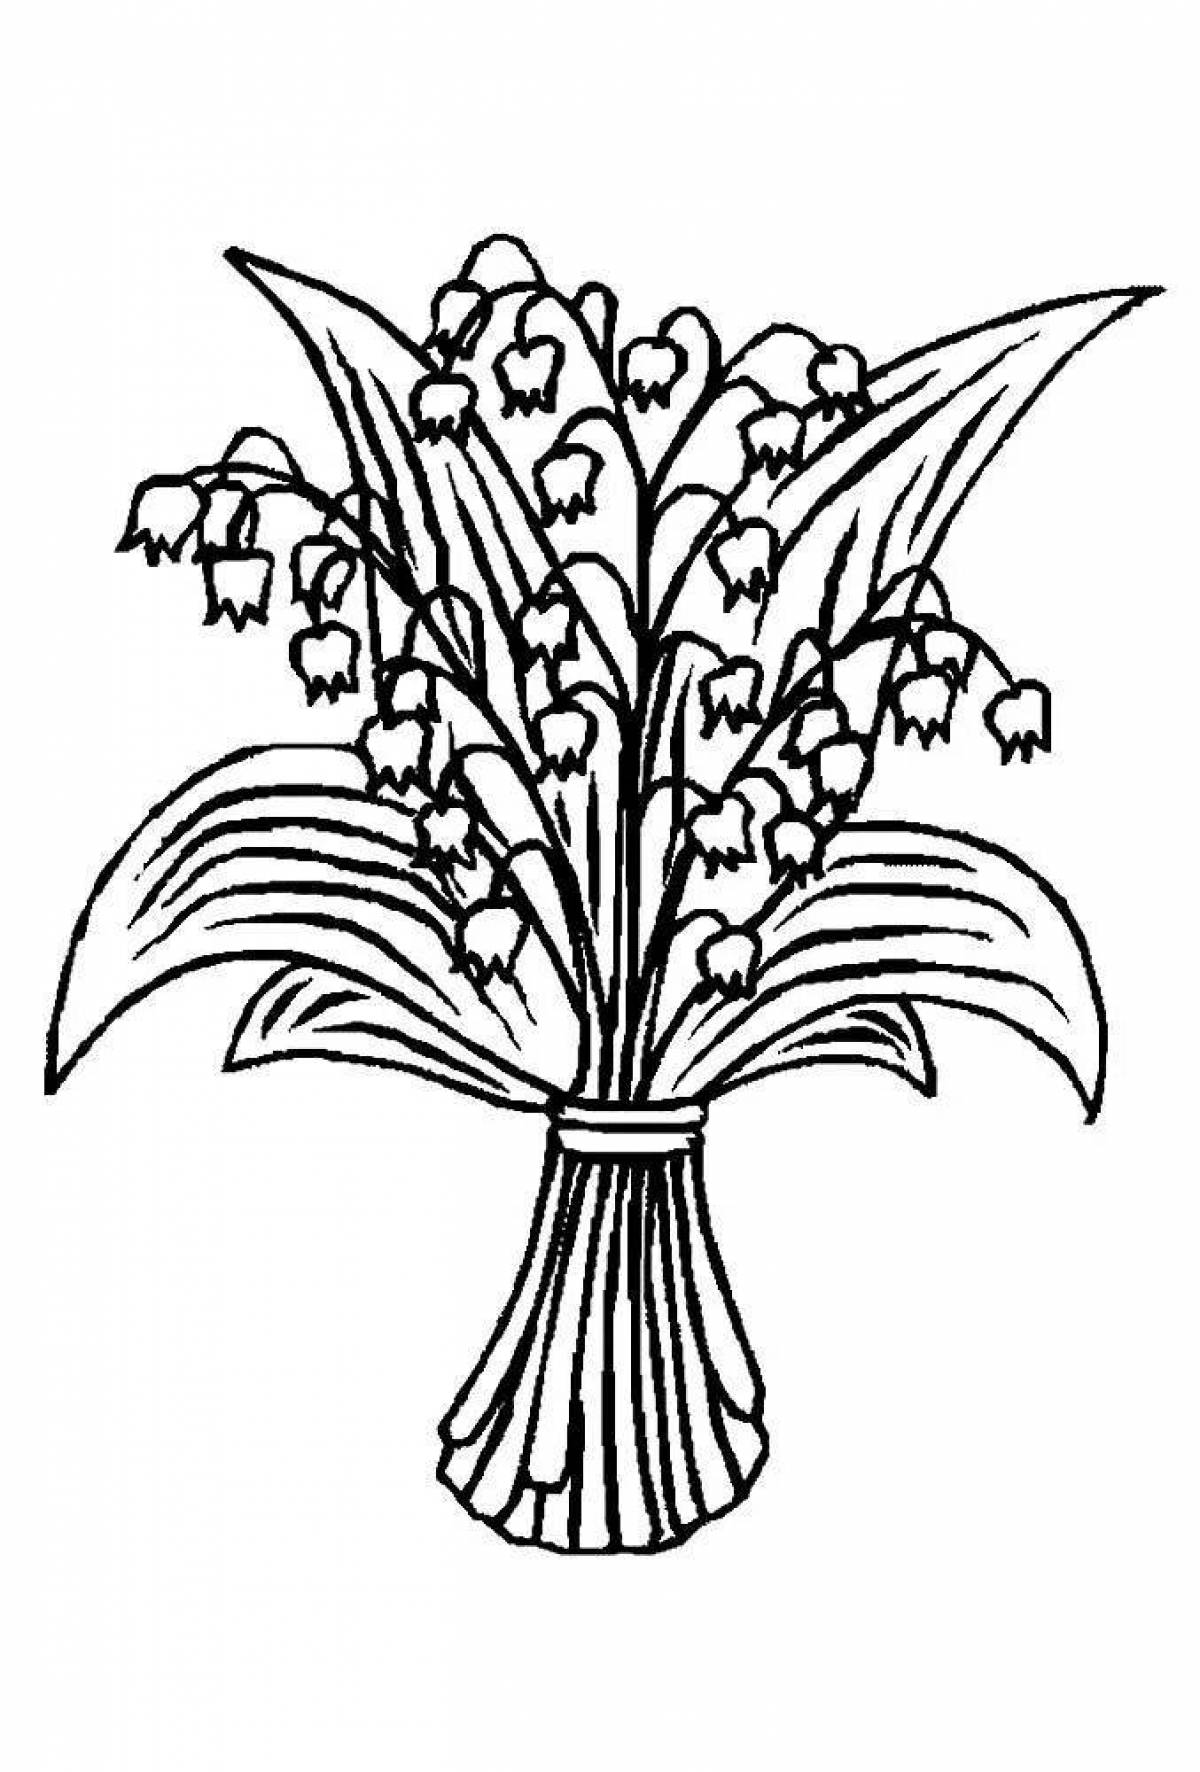 Violent lily of the valley coloring book for kids